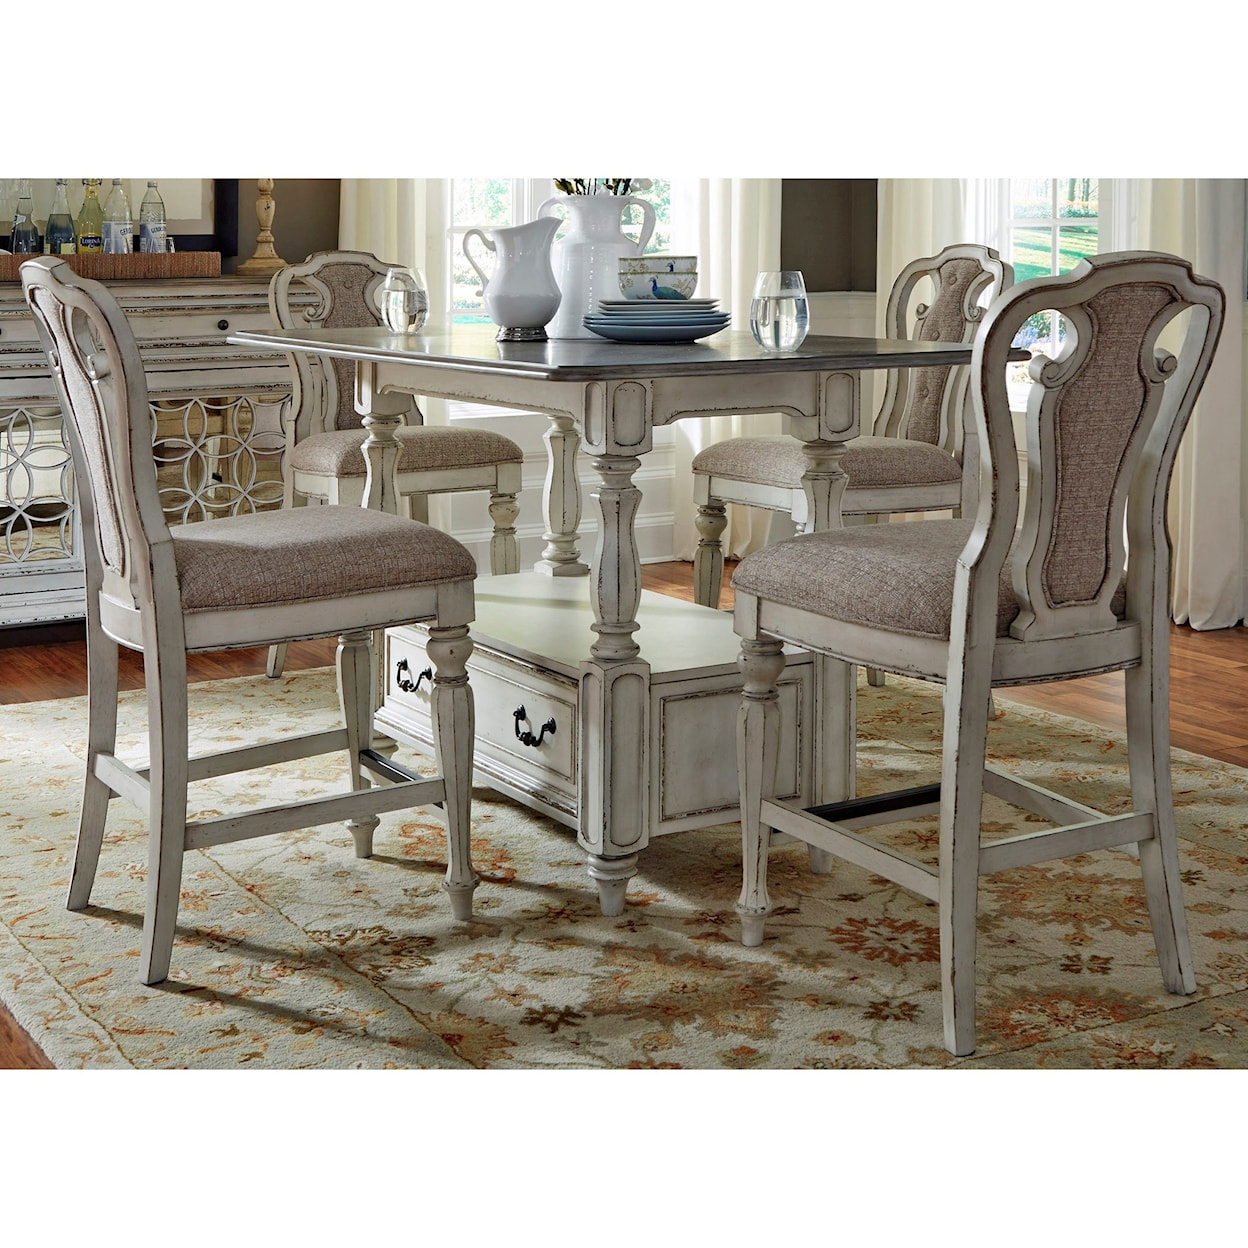 Liberty Furniture Magnolia Manor Gathering Table and Chair Set